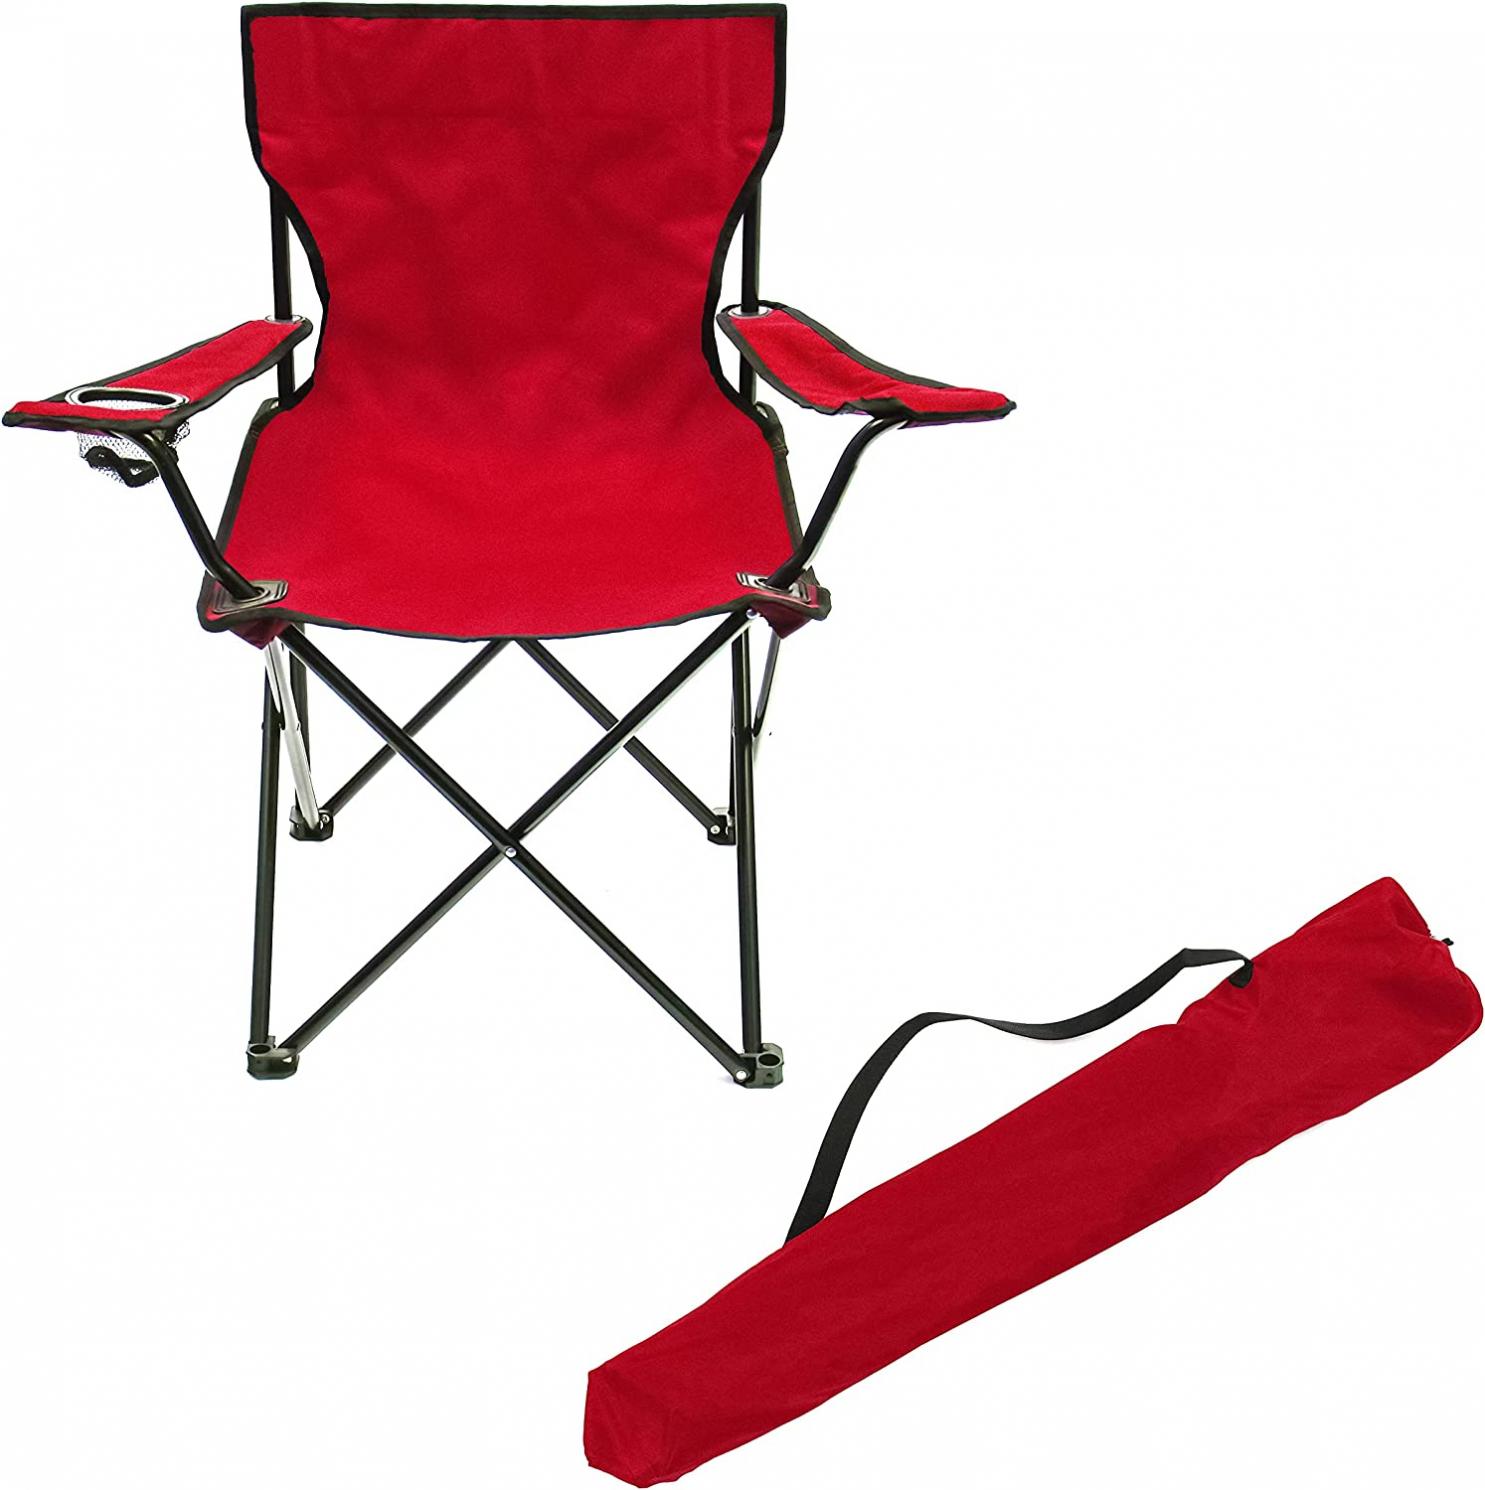 Trademark Innovations Folding Outdoor Beach Camp Chair, 19.5" L x 31" W x 34.5" H, Red